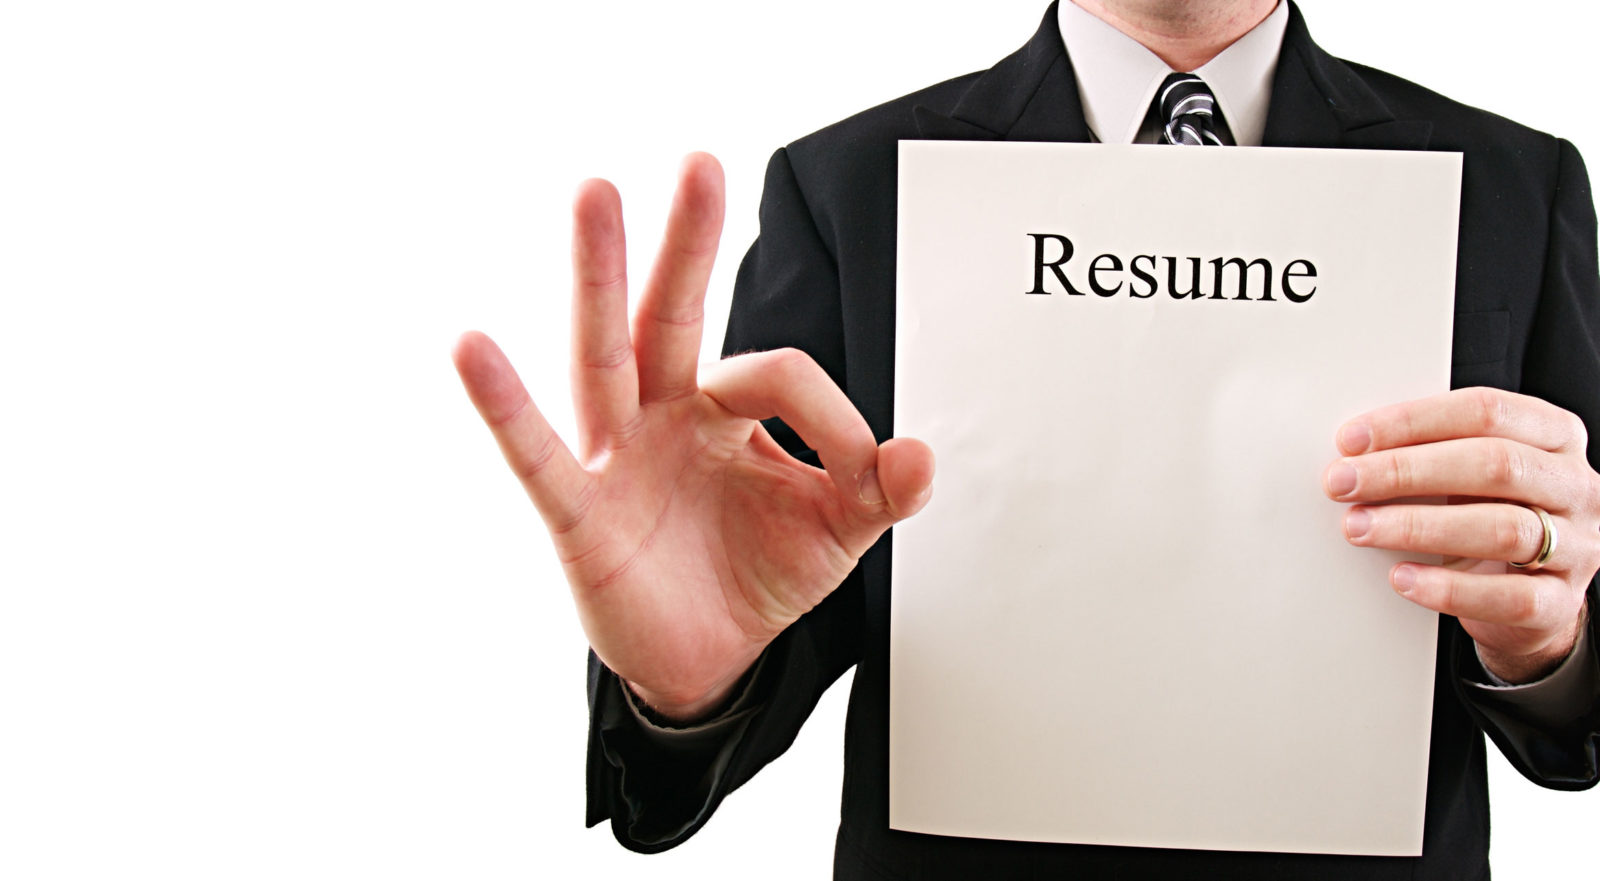 Does your resume shout “Hire me”?